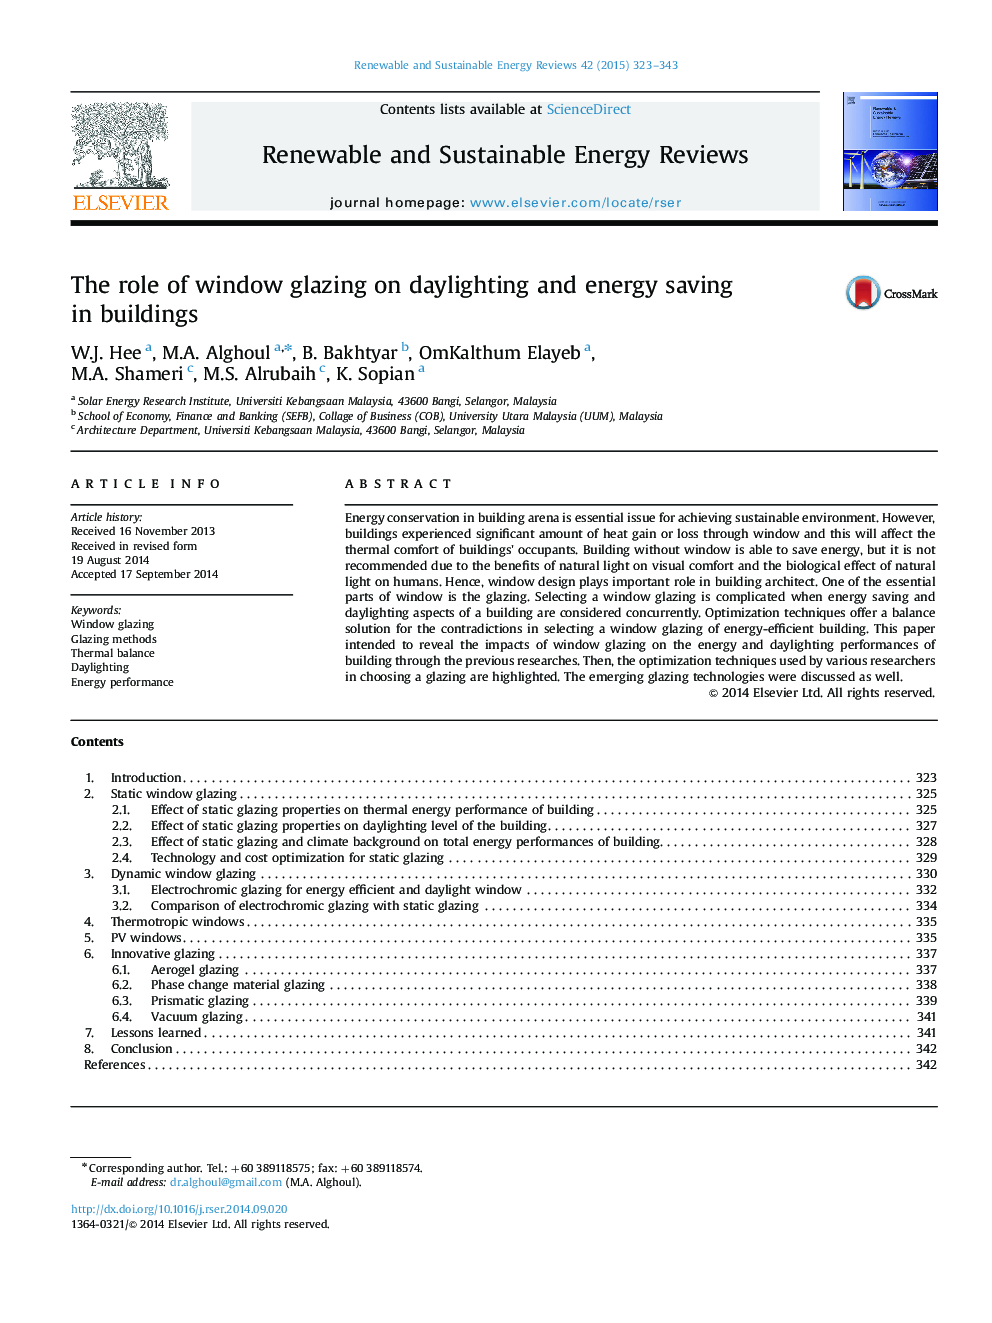 The role of window glazing on daylighting and energy saving in buildings